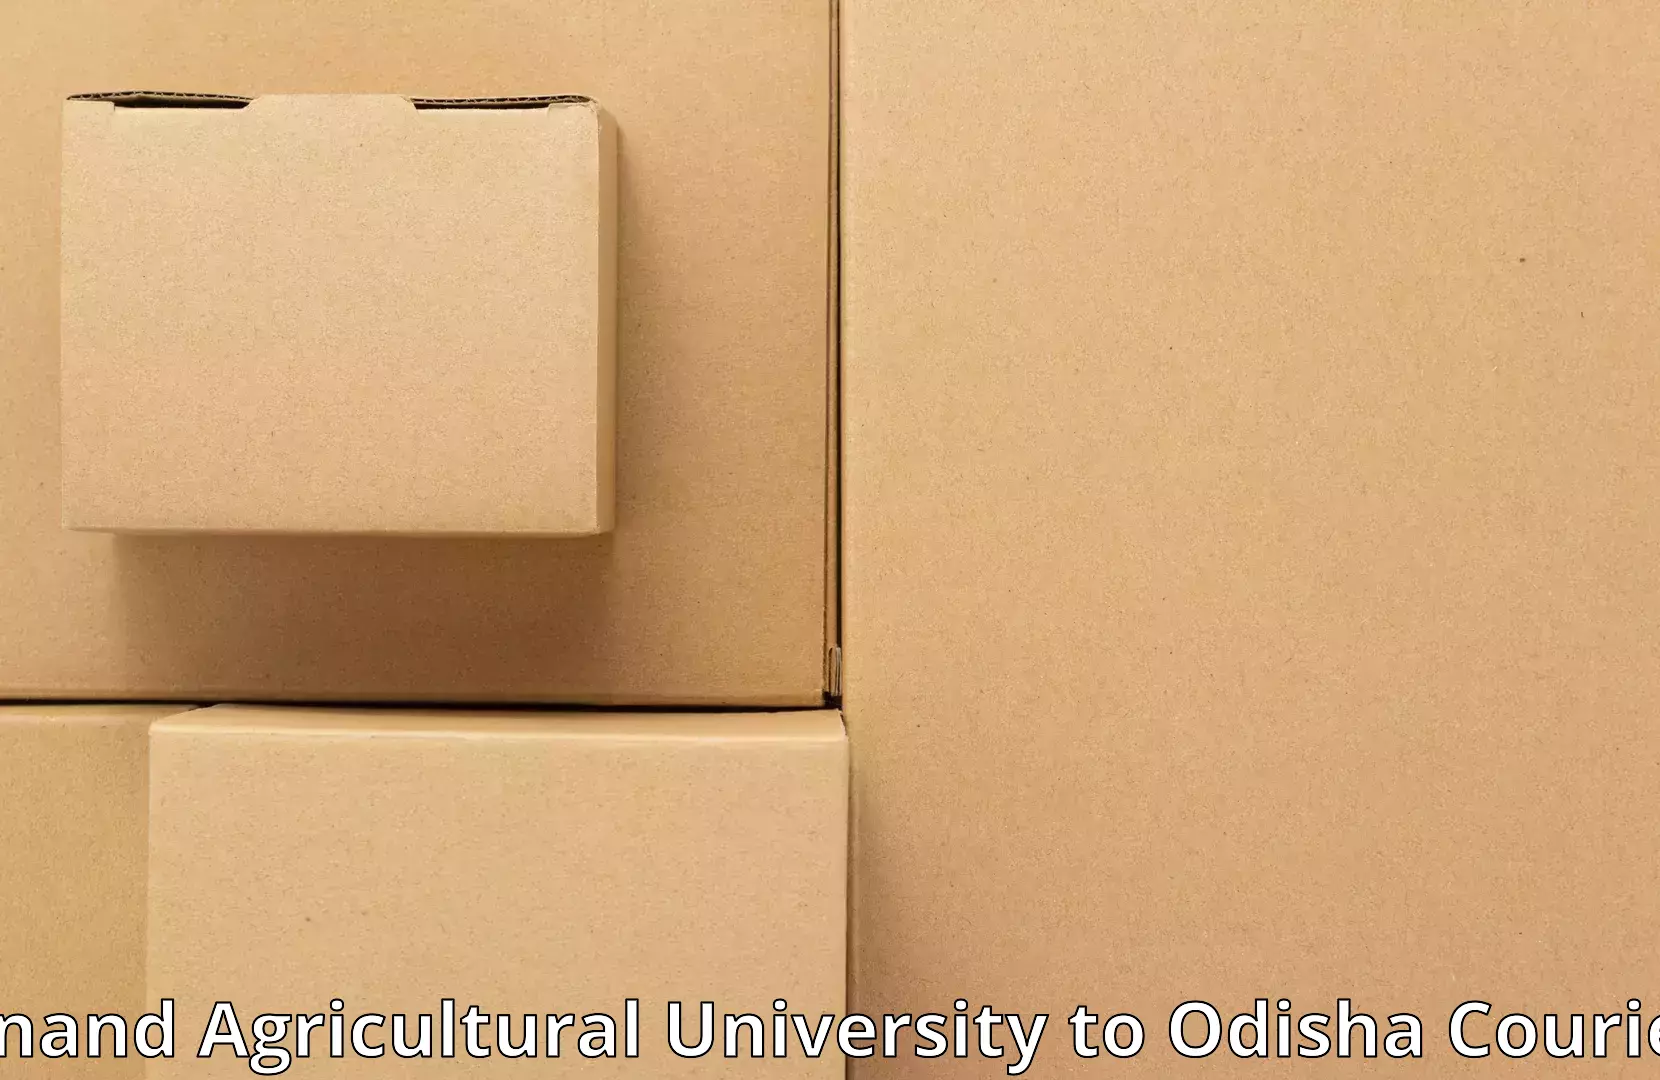 Furniture moving assistance Anand Agricultural University to Koraput